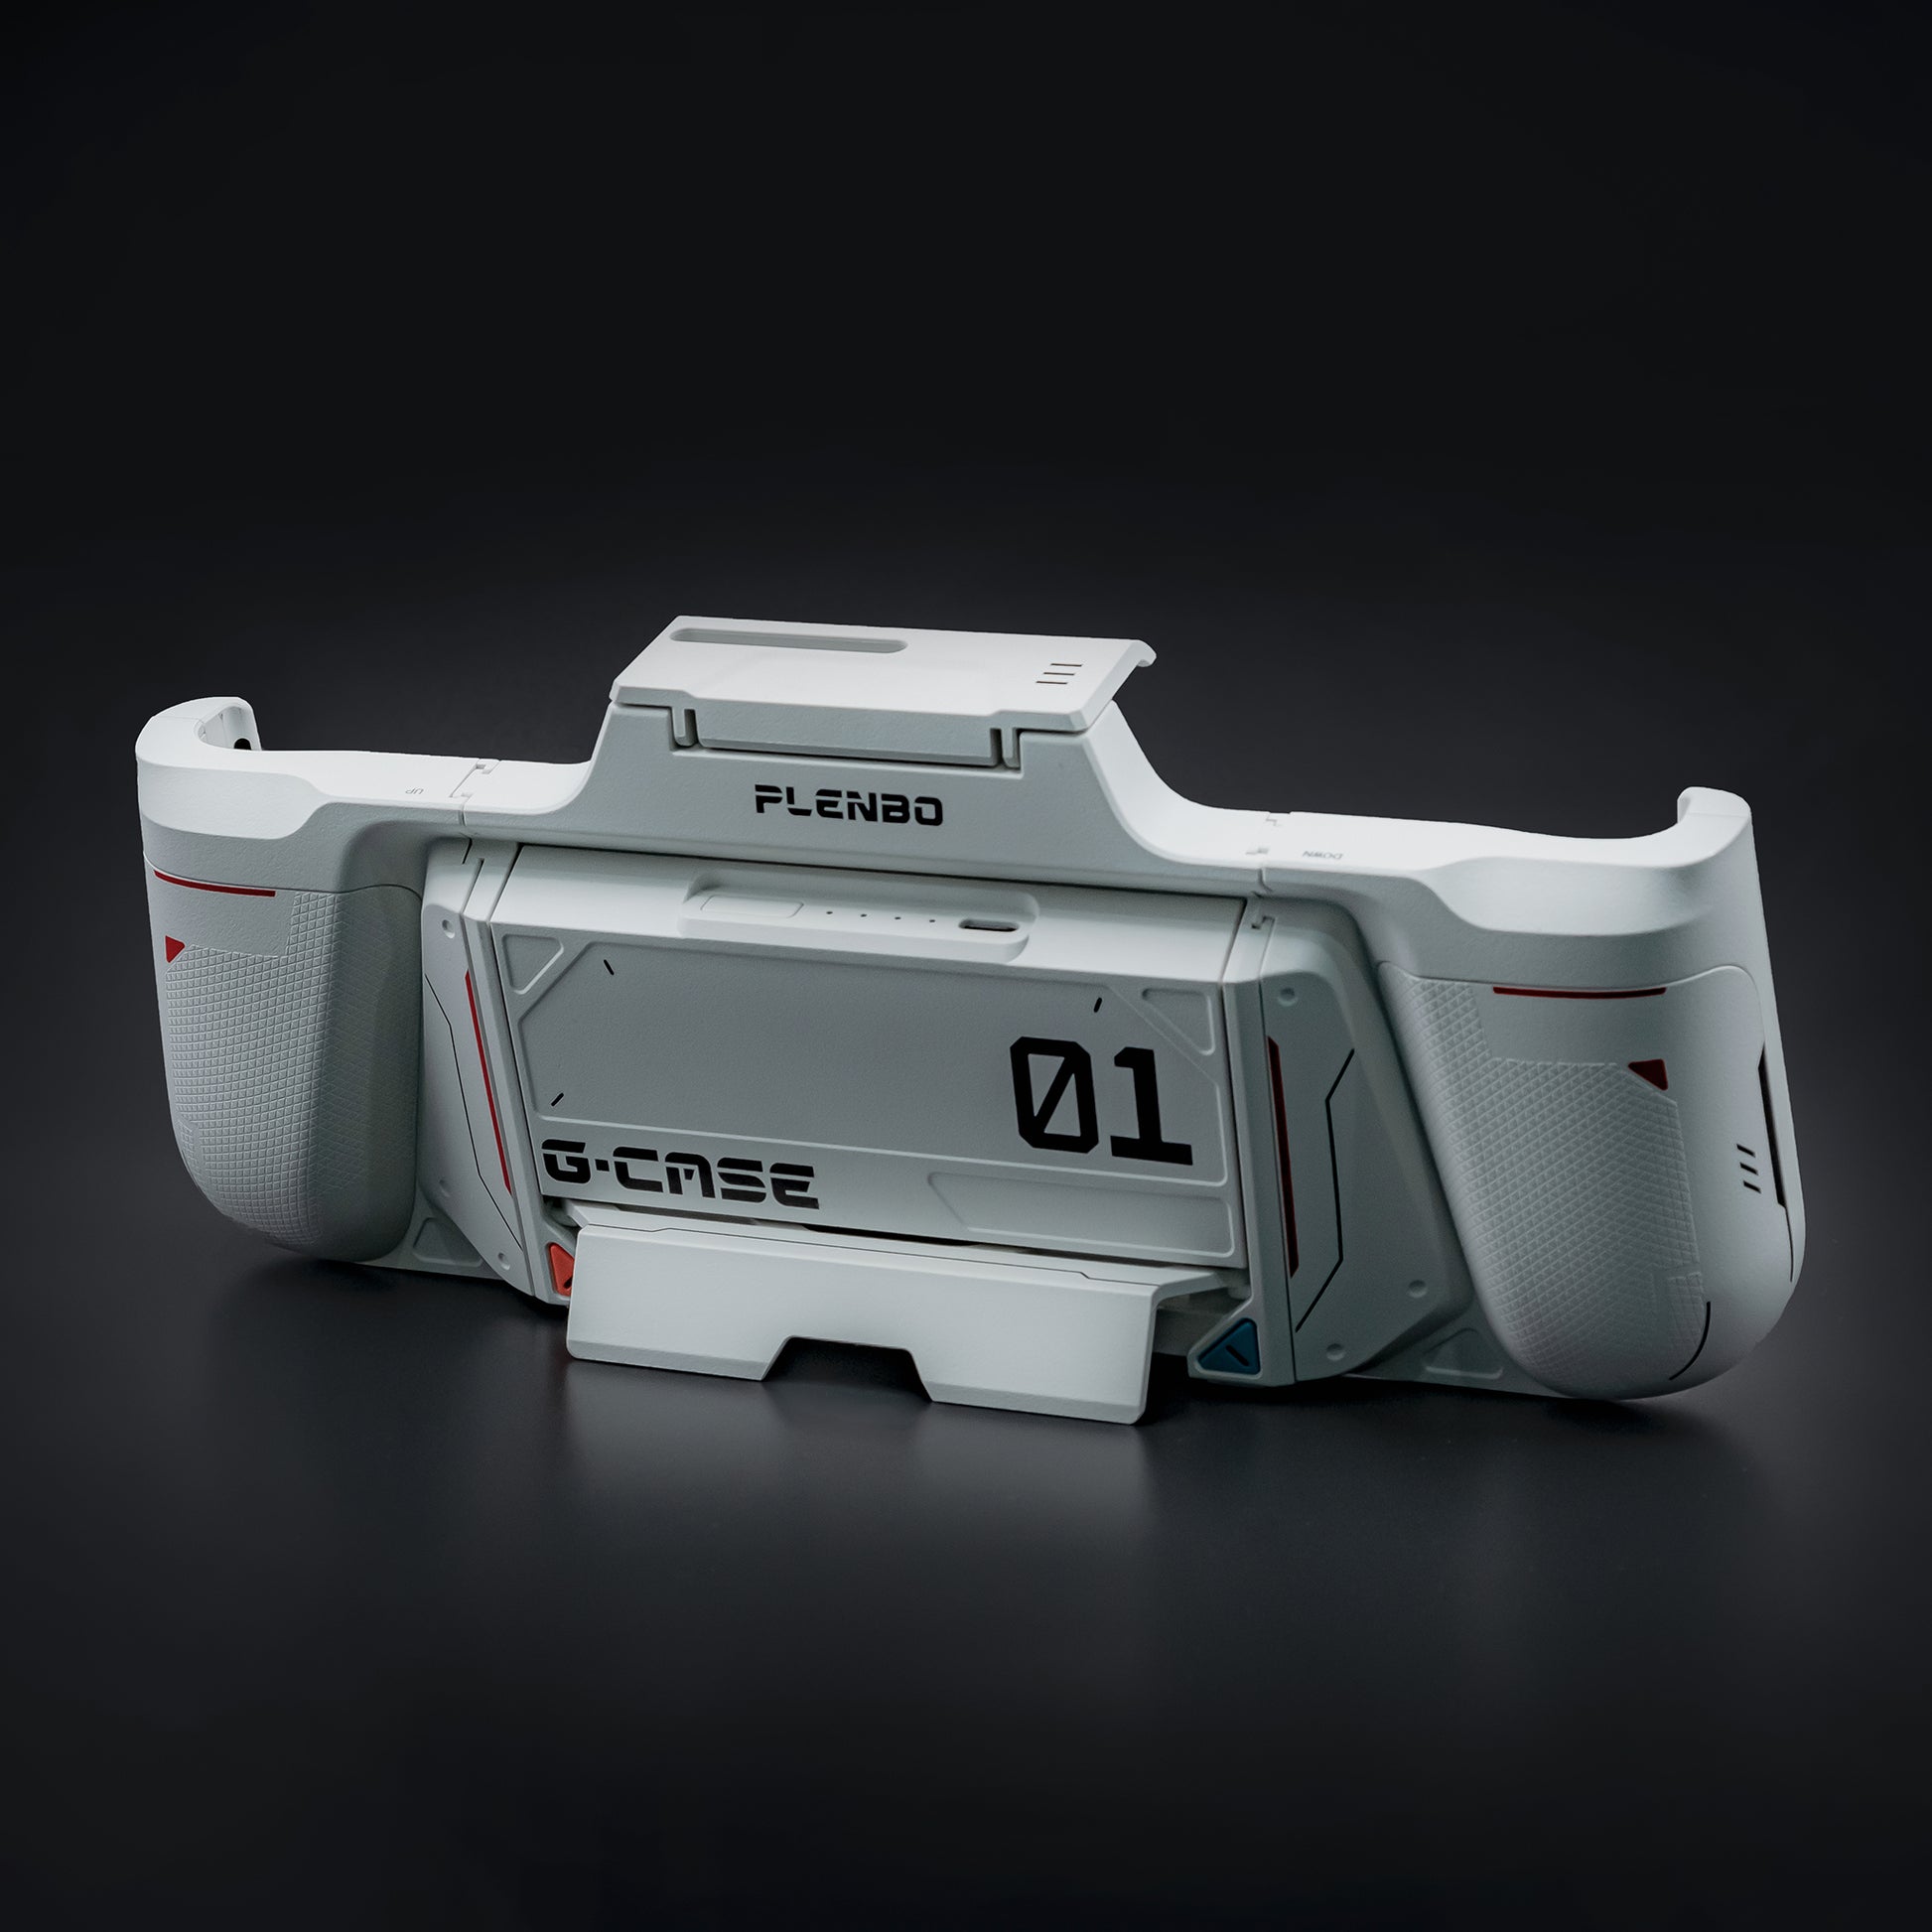 A white G-case in handheld mode with a Gundam-like shape